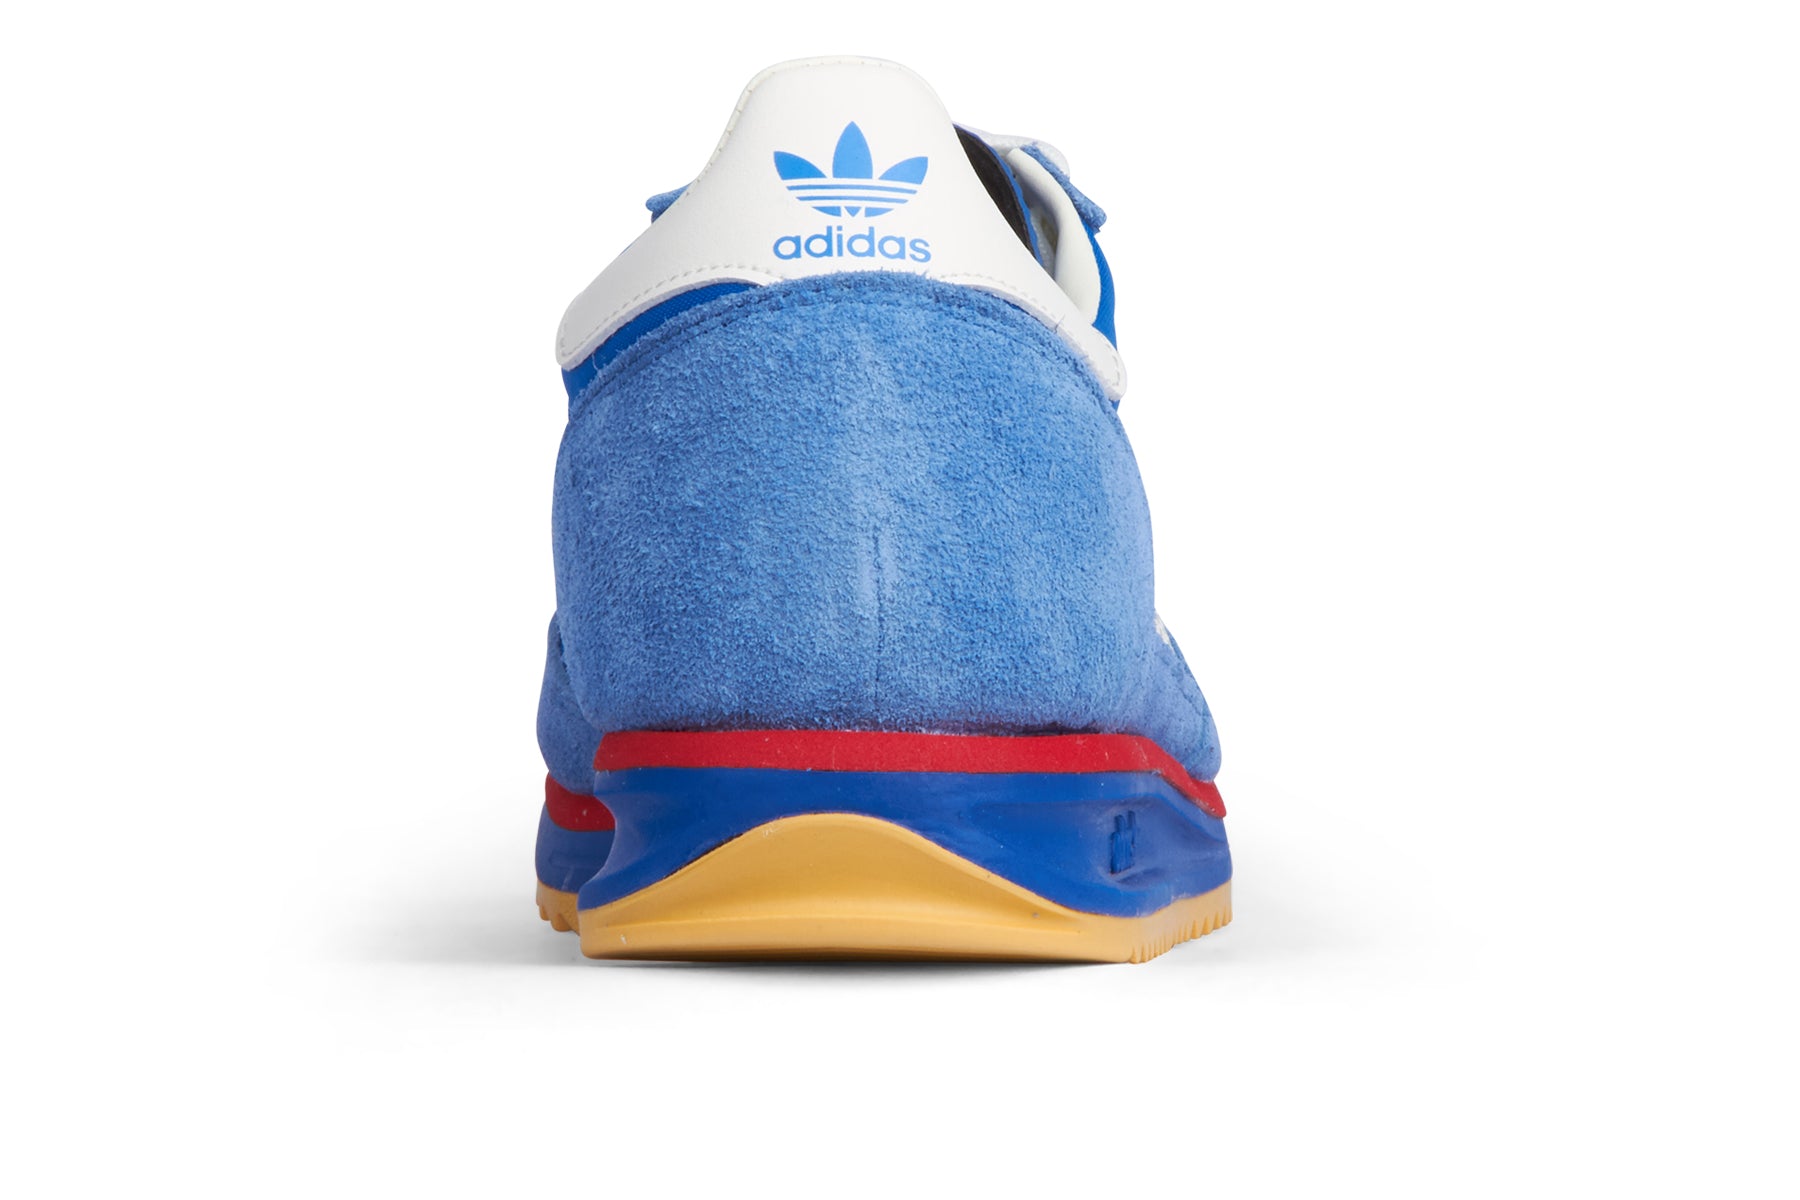 Adidas SL 72 RS - Blue/Core White/Better Scarlet